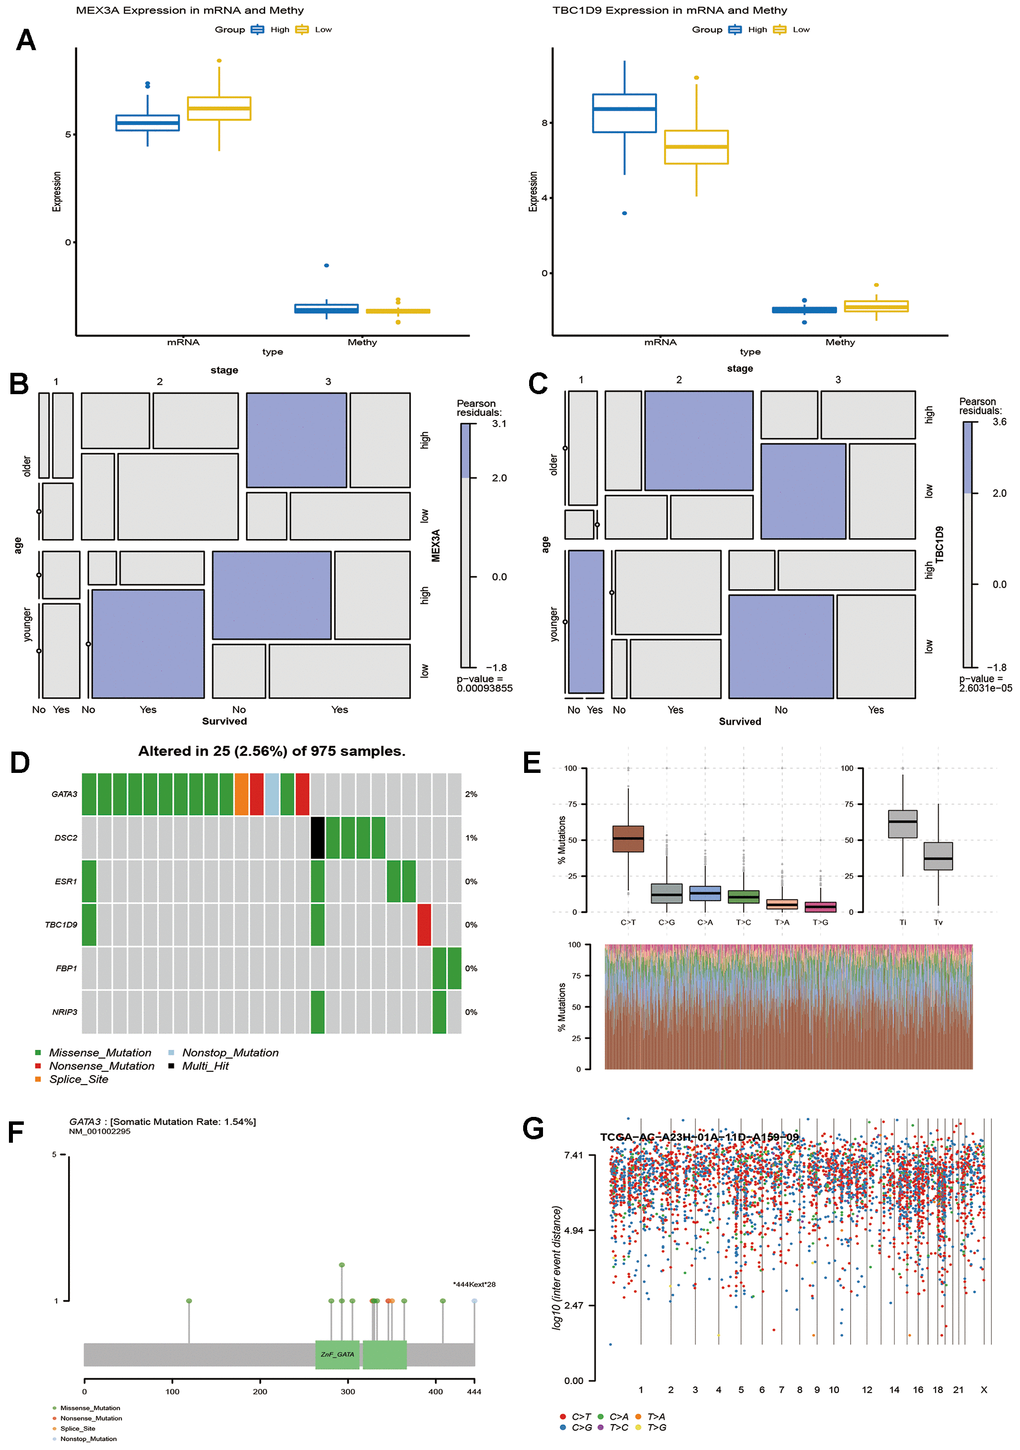 Potential factors affecting key genes that influence the survival time of breast cancer patients. (A) Methylation level and expression of MEX3A and TBC1D9 in breast cancer patients with survival times greater than or less than 5 years. Mosaic analysis identified the relationship between the expression of MEX3A (B) or TBC1D9 (C) and the prognosis and clinical information of breast cancer. (D). Six key genes were sequenced according to their mutation frequency. Different colours represent different methods of mutation. (E) The transition and crosscut graphs show the distribution of SNV in breast cancer with six transition and crosscut events. The stacked bar graph (bottom) shows the mutation spectrum distribution of each sample. (F) The Lollipop map shows the mutation distribution and protein domain of GATA3 with a high frequency of mutation. (G) The Rainfall map of TCGA-AC-A23H-01A-11D-A159-09 breast cancer sample. Each point is a mutation colour coded according to the SNV classification.